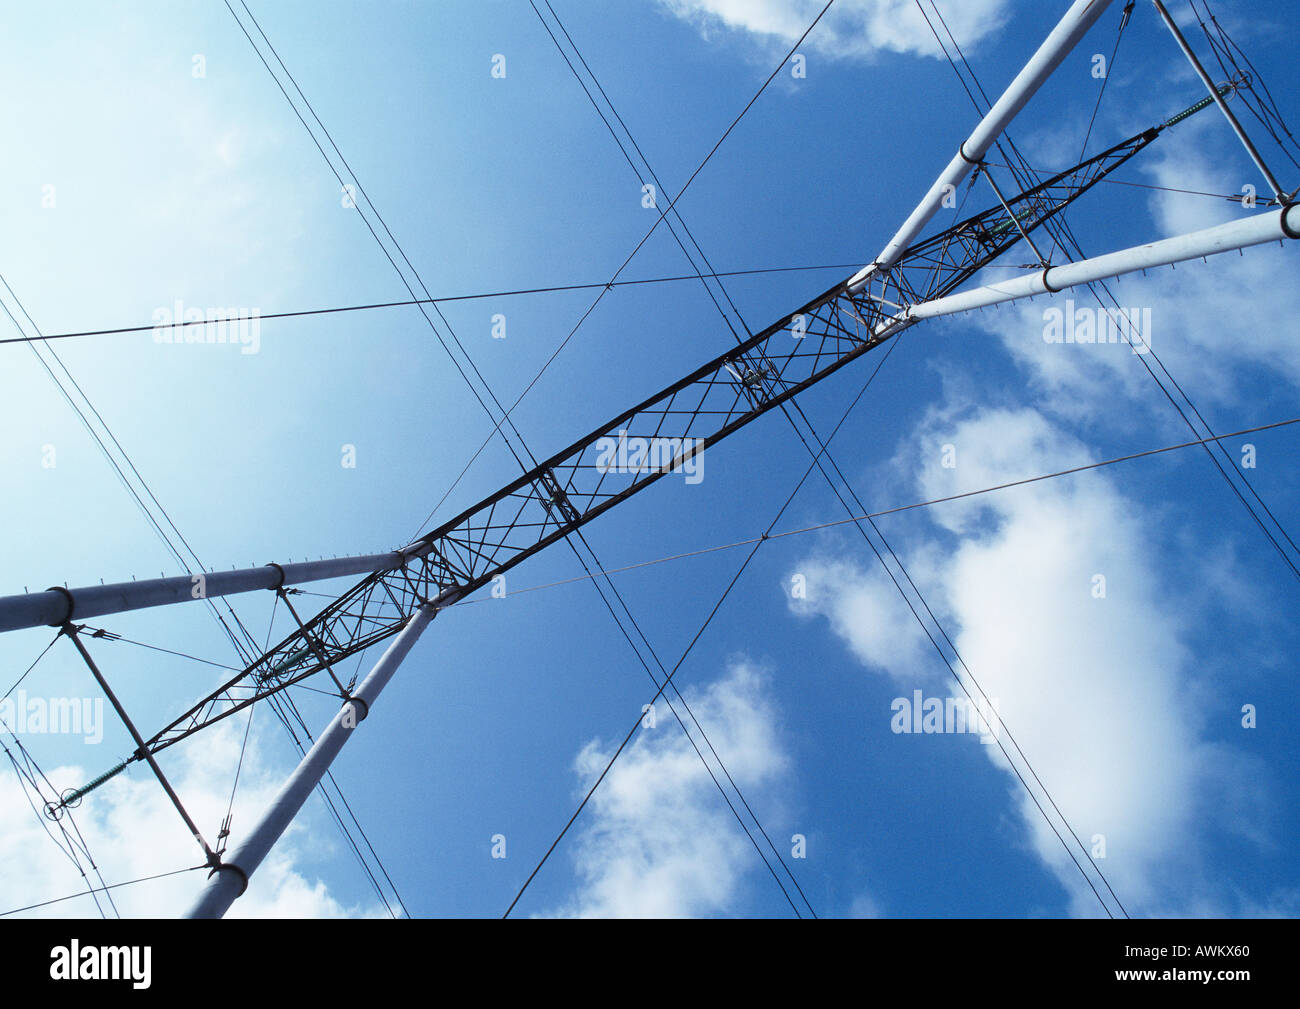 Pylon and electric wires, low angle view Stock Photo